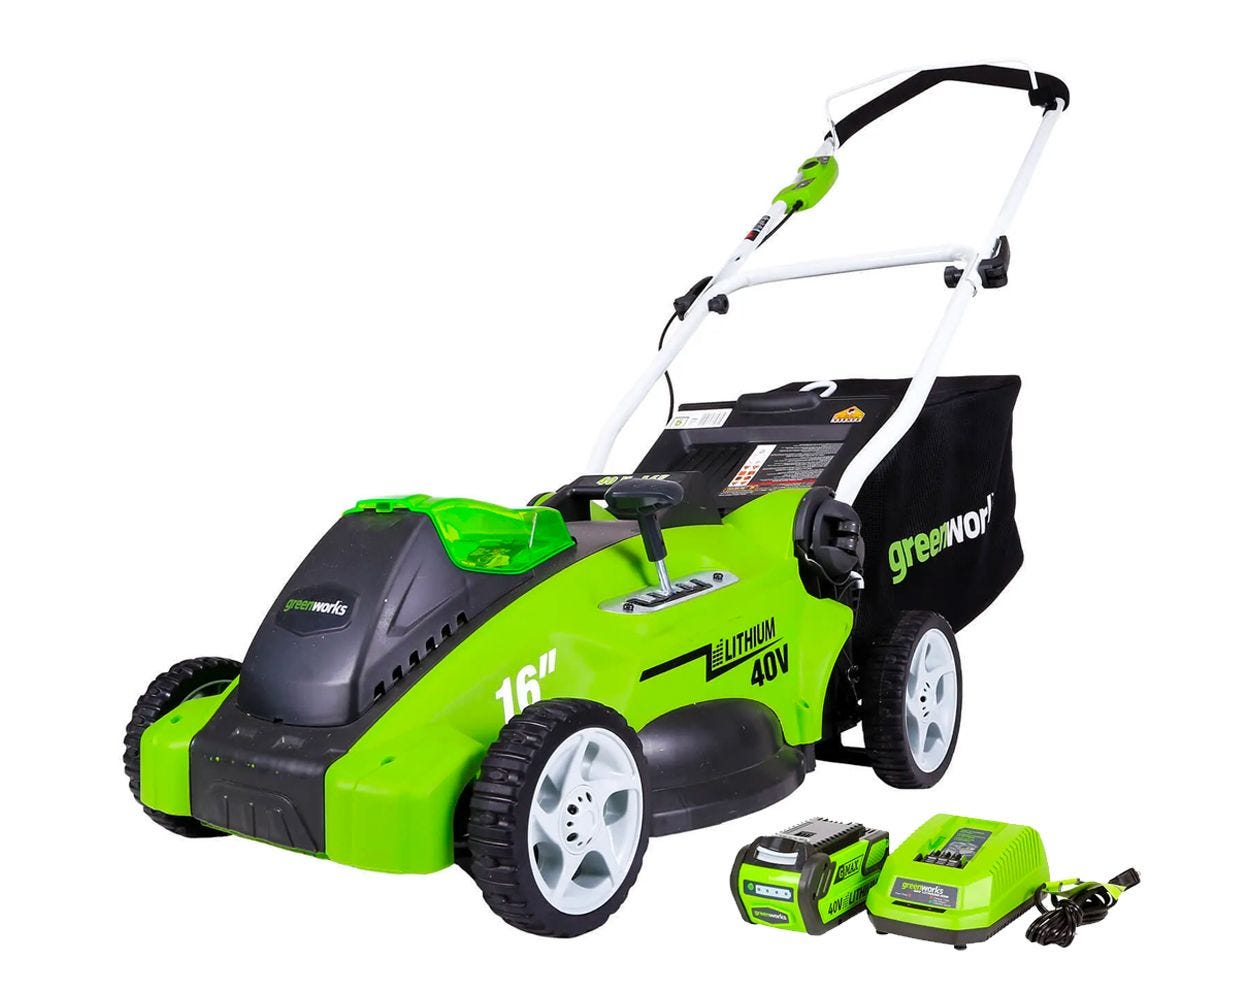 Greenworks 40V 16" Battery Powered Push Lawn Mower with 4.0 Ah Battery 25322 - image 1 of 16